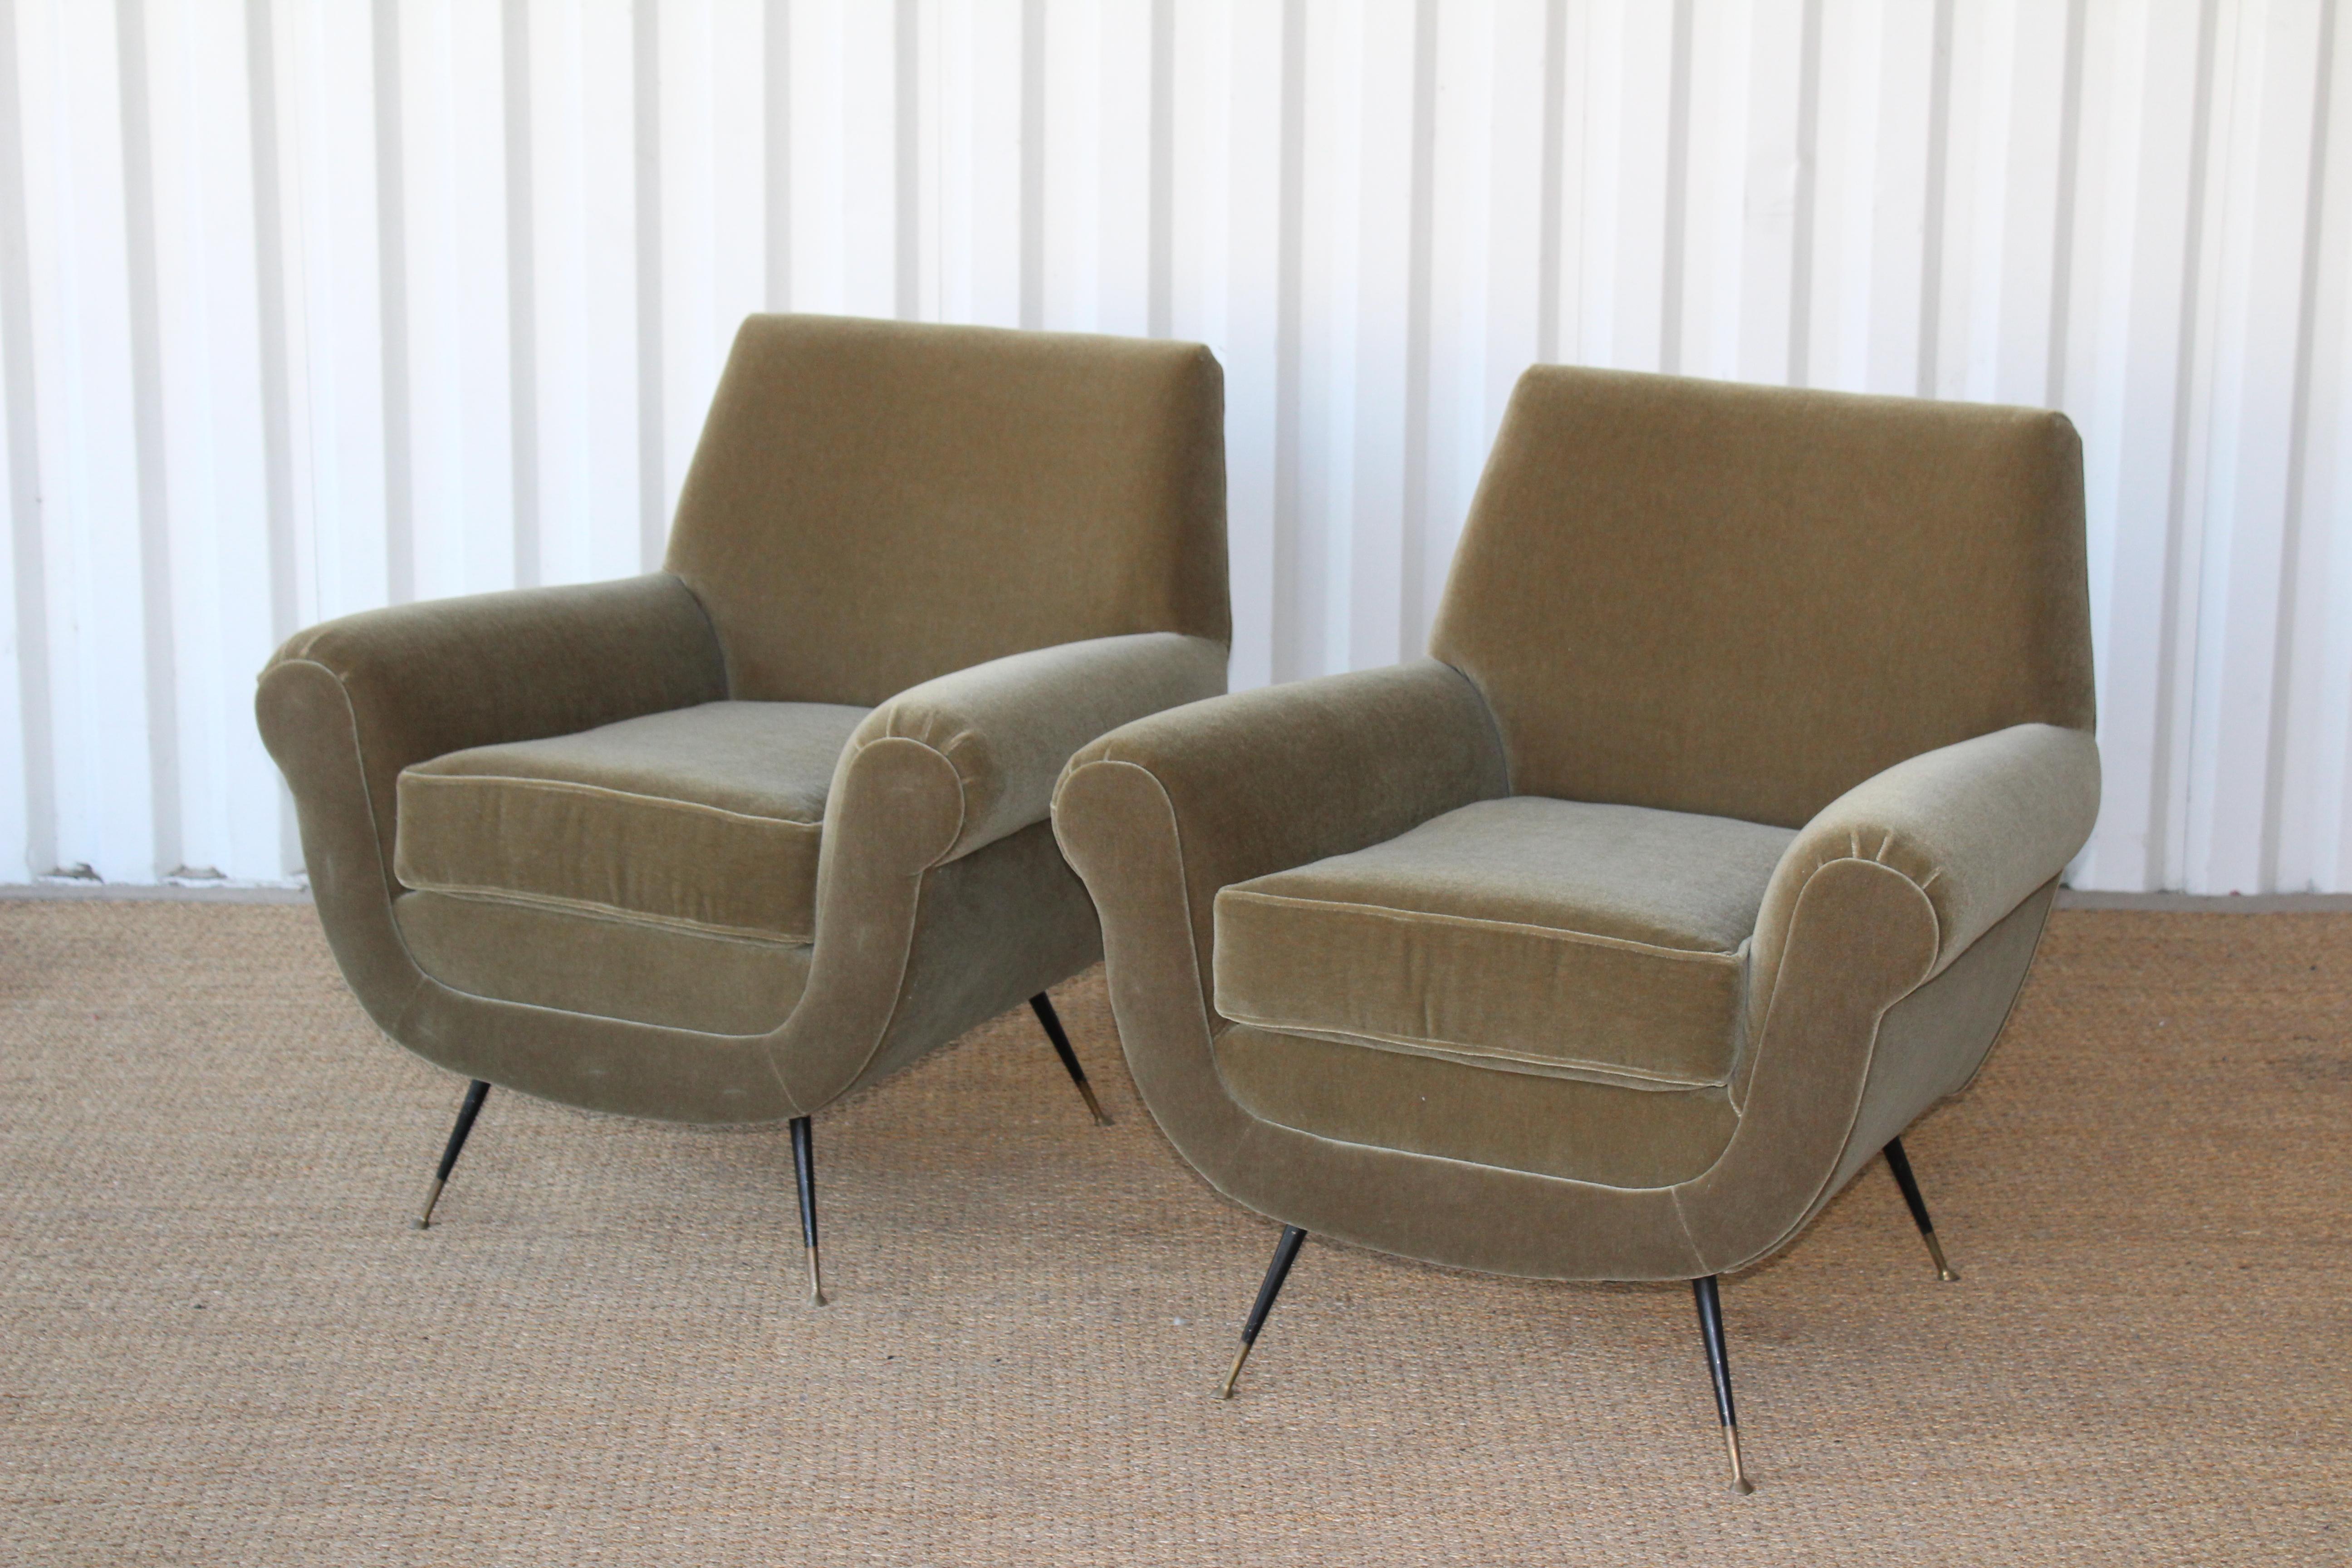 Mid-Century Modern Pair of Lounge Chairs by Gigi Radice for Minotti, Italy, 1950s